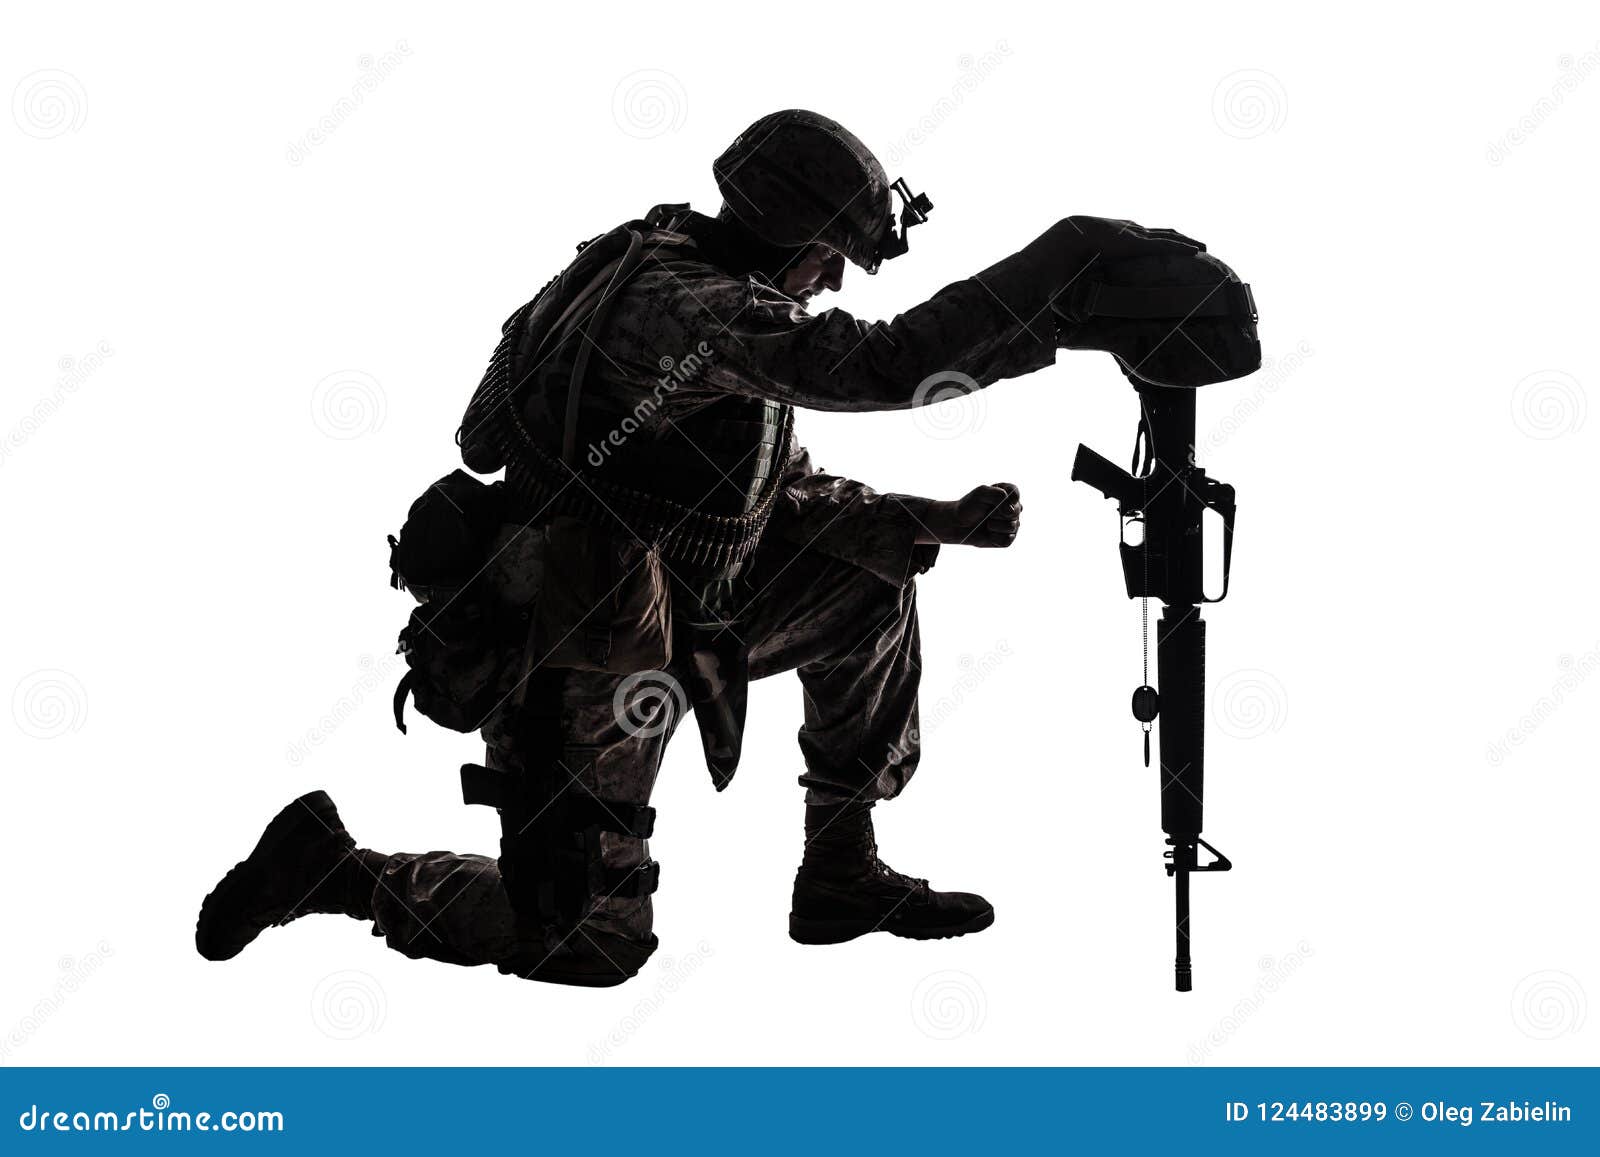 Sad Soldier Kneeling Because Of Friend Death Stock Image - Image of